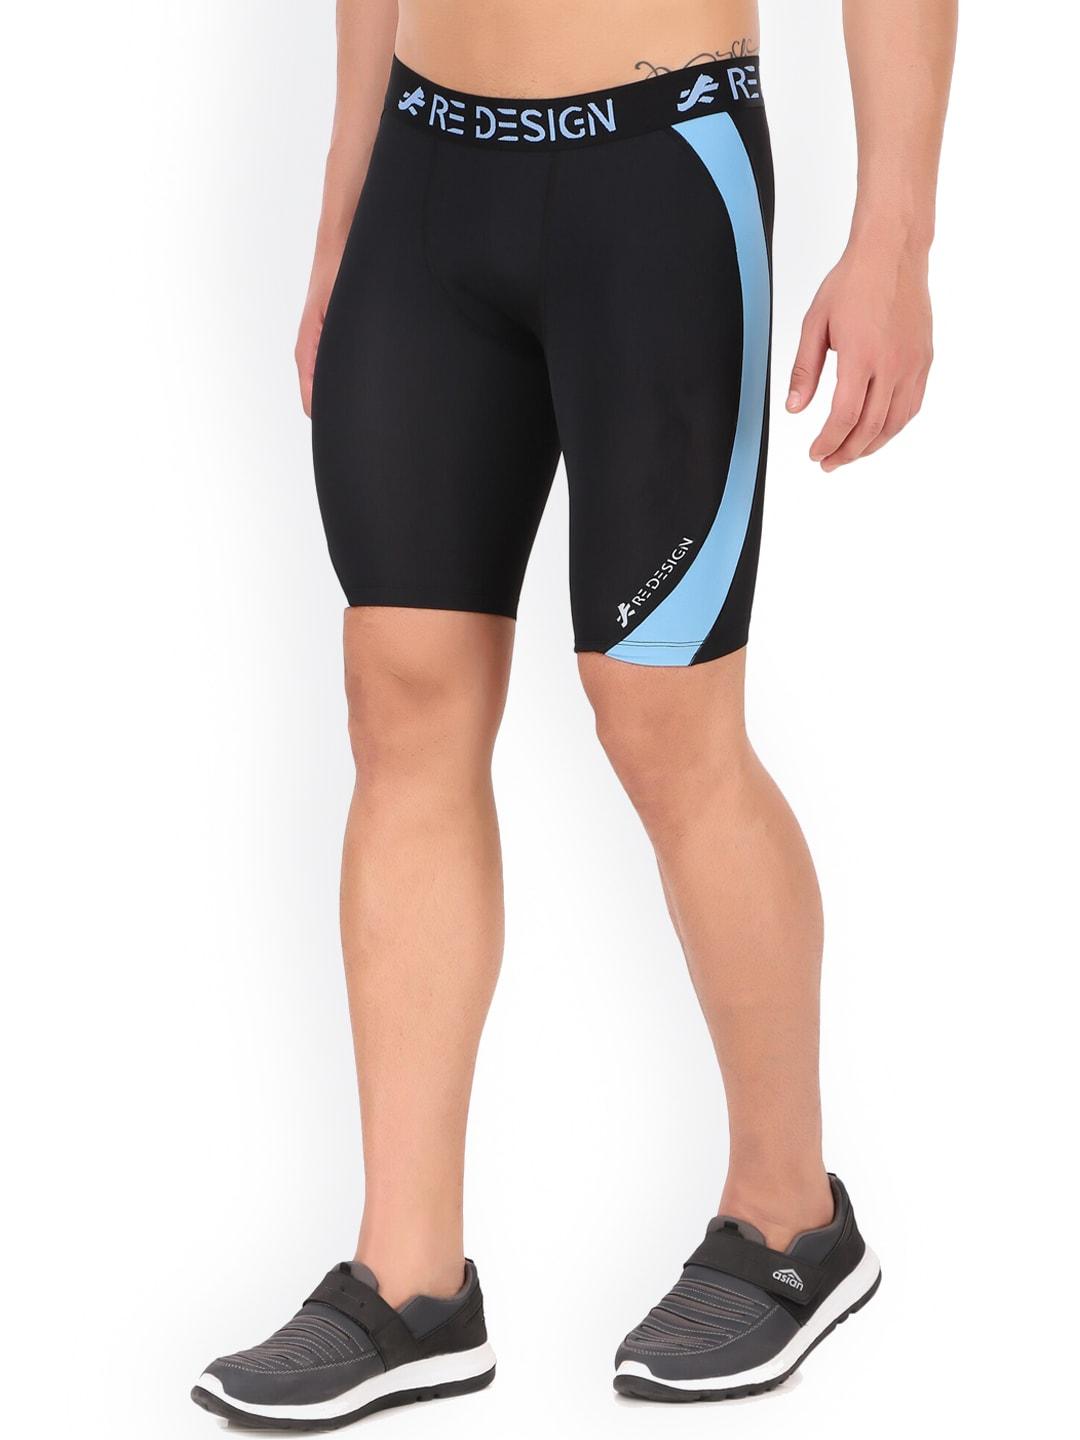 redesign men skinny fit rapid-dry running sports shorts